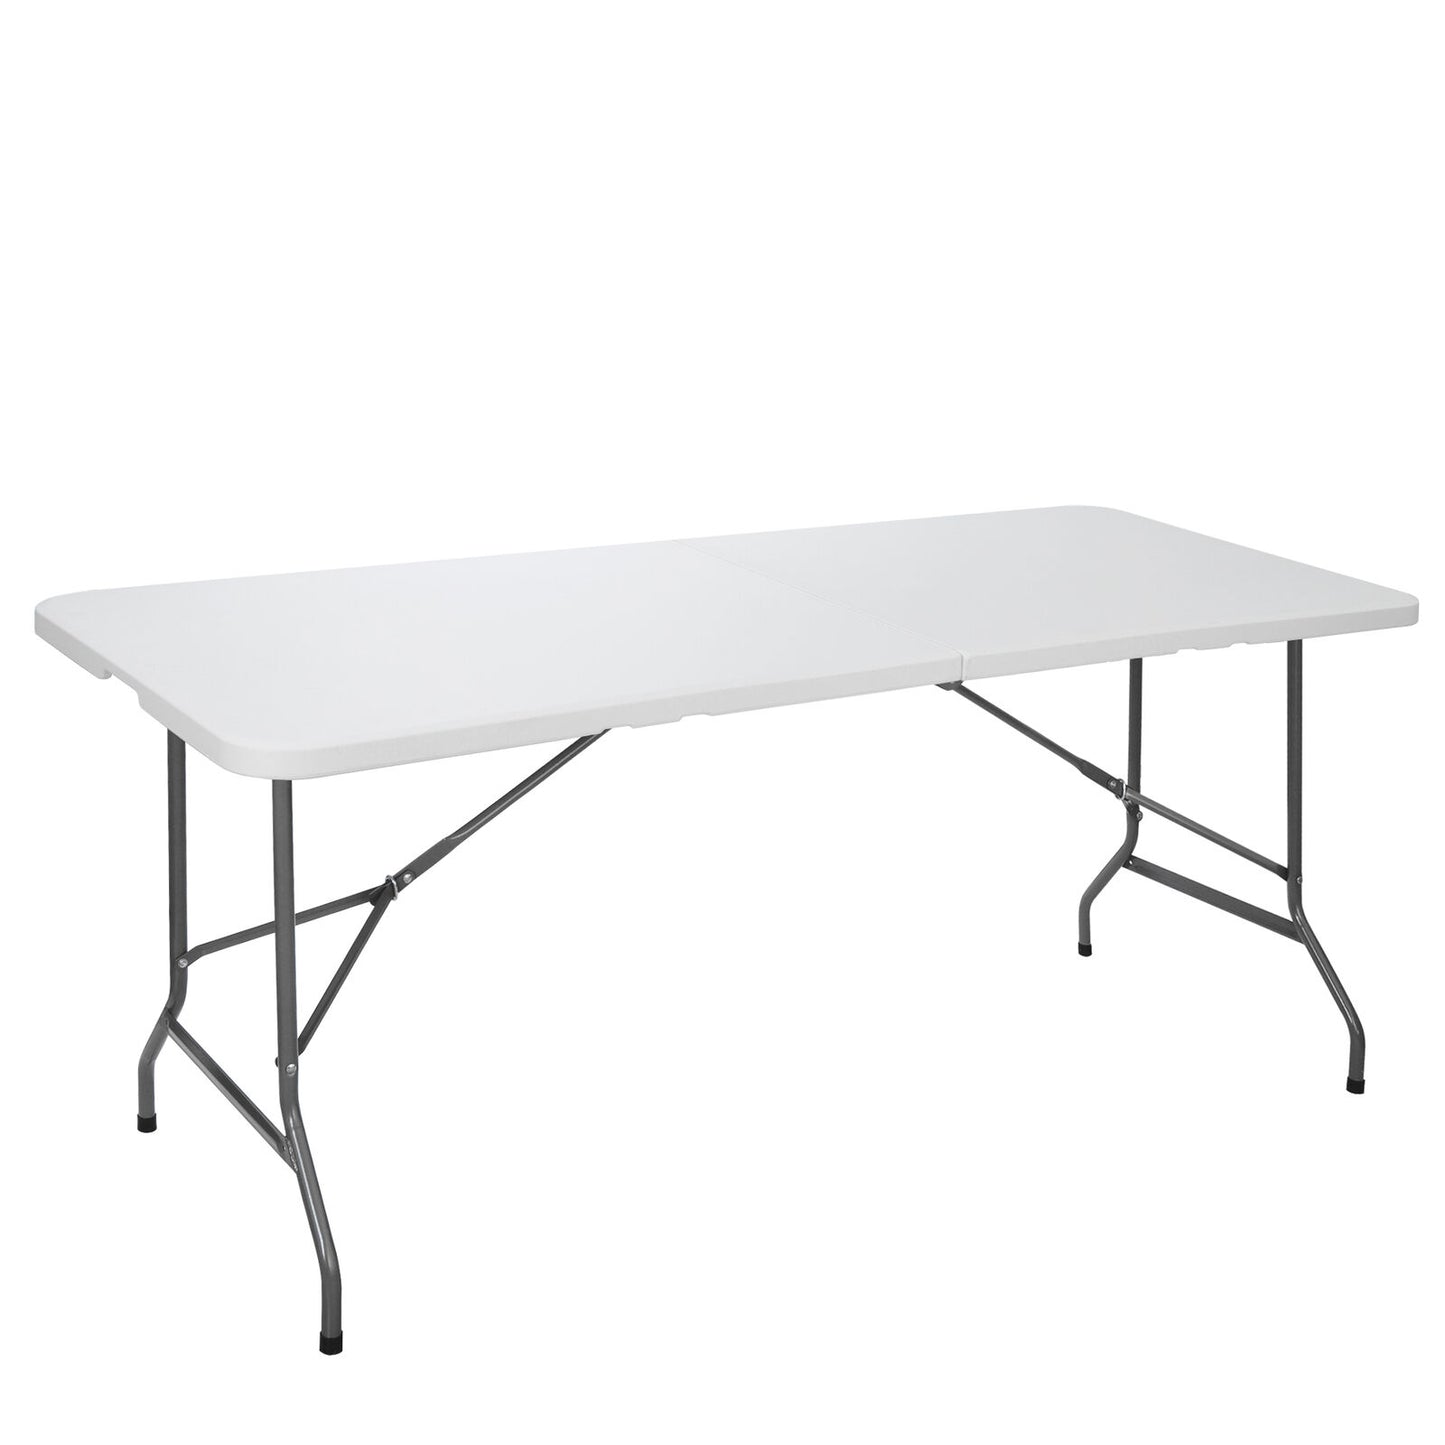 4X 6' Portable Folding Table Plastic Picnic Party Camp Dining White Indoor